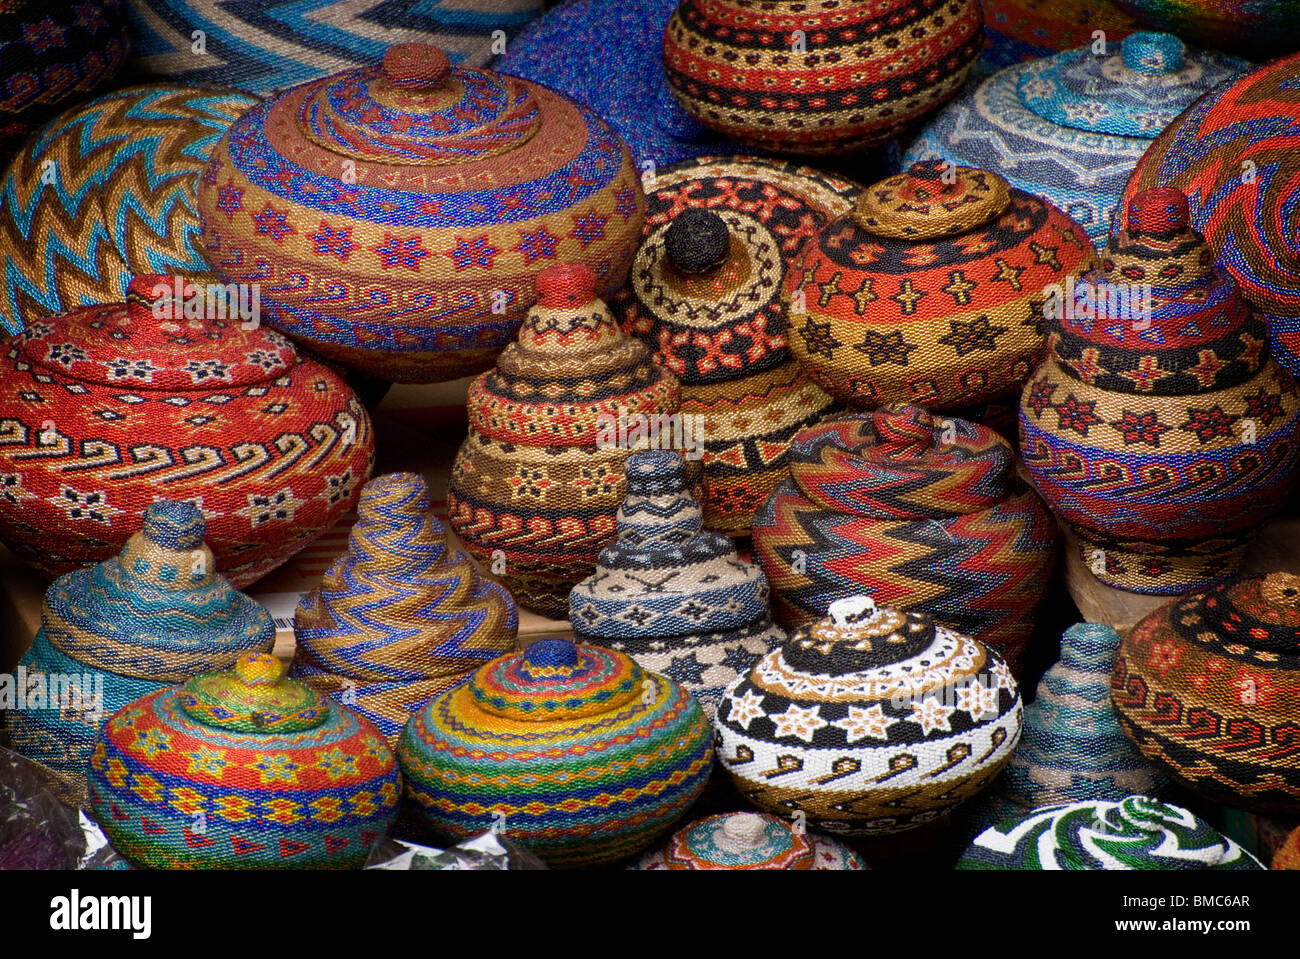 At the Ubud, Bali, public market there is a variety of art and handicrafts available for sale. These are colorful beaded baskets Stock Photo